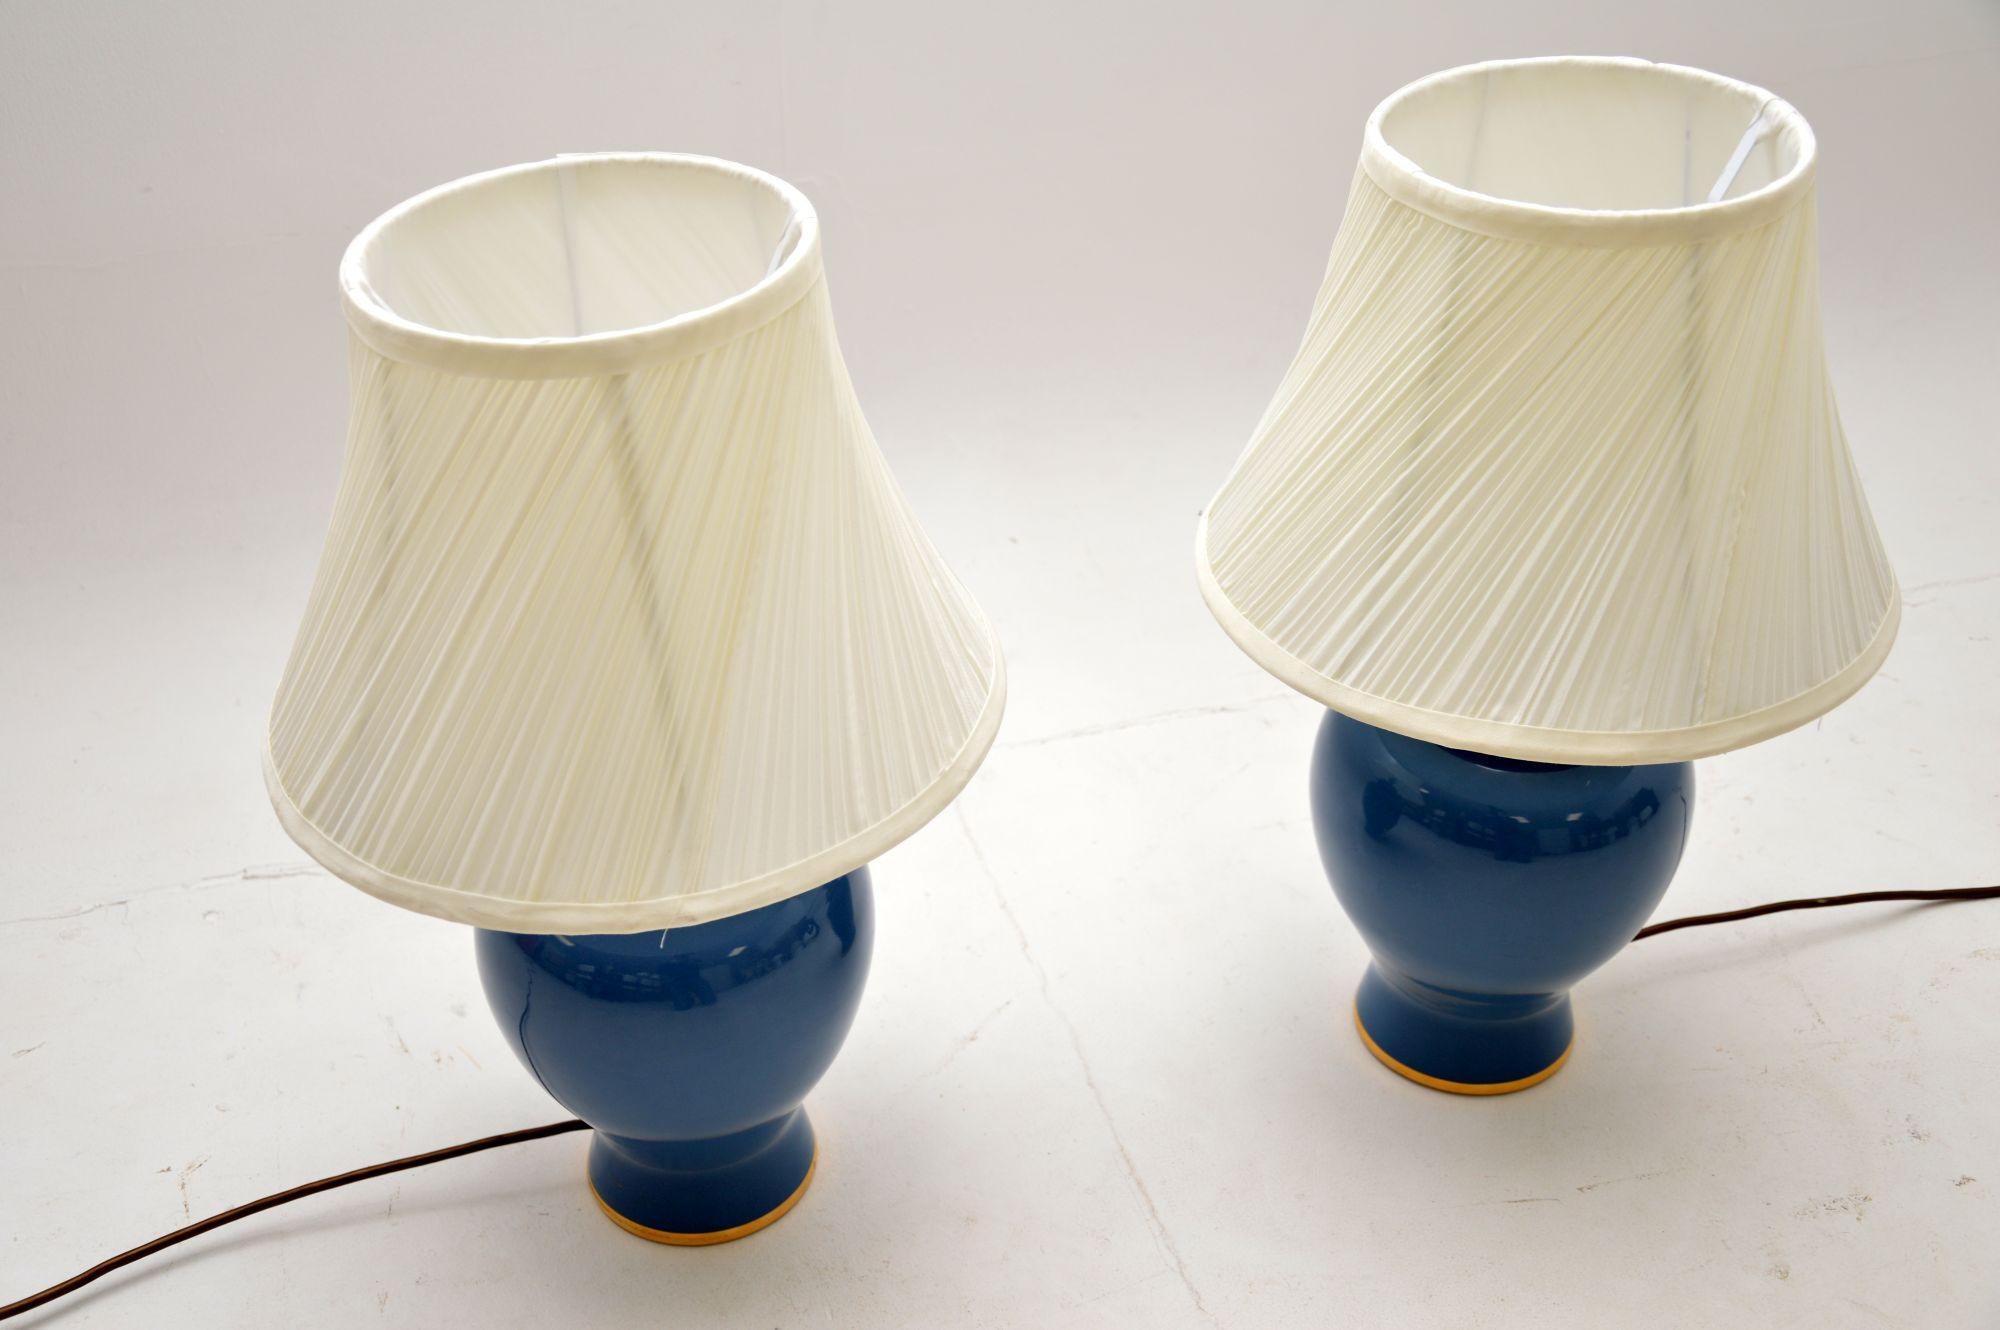 Chinese Export Pair of Vintage Ceramic Table Lamps